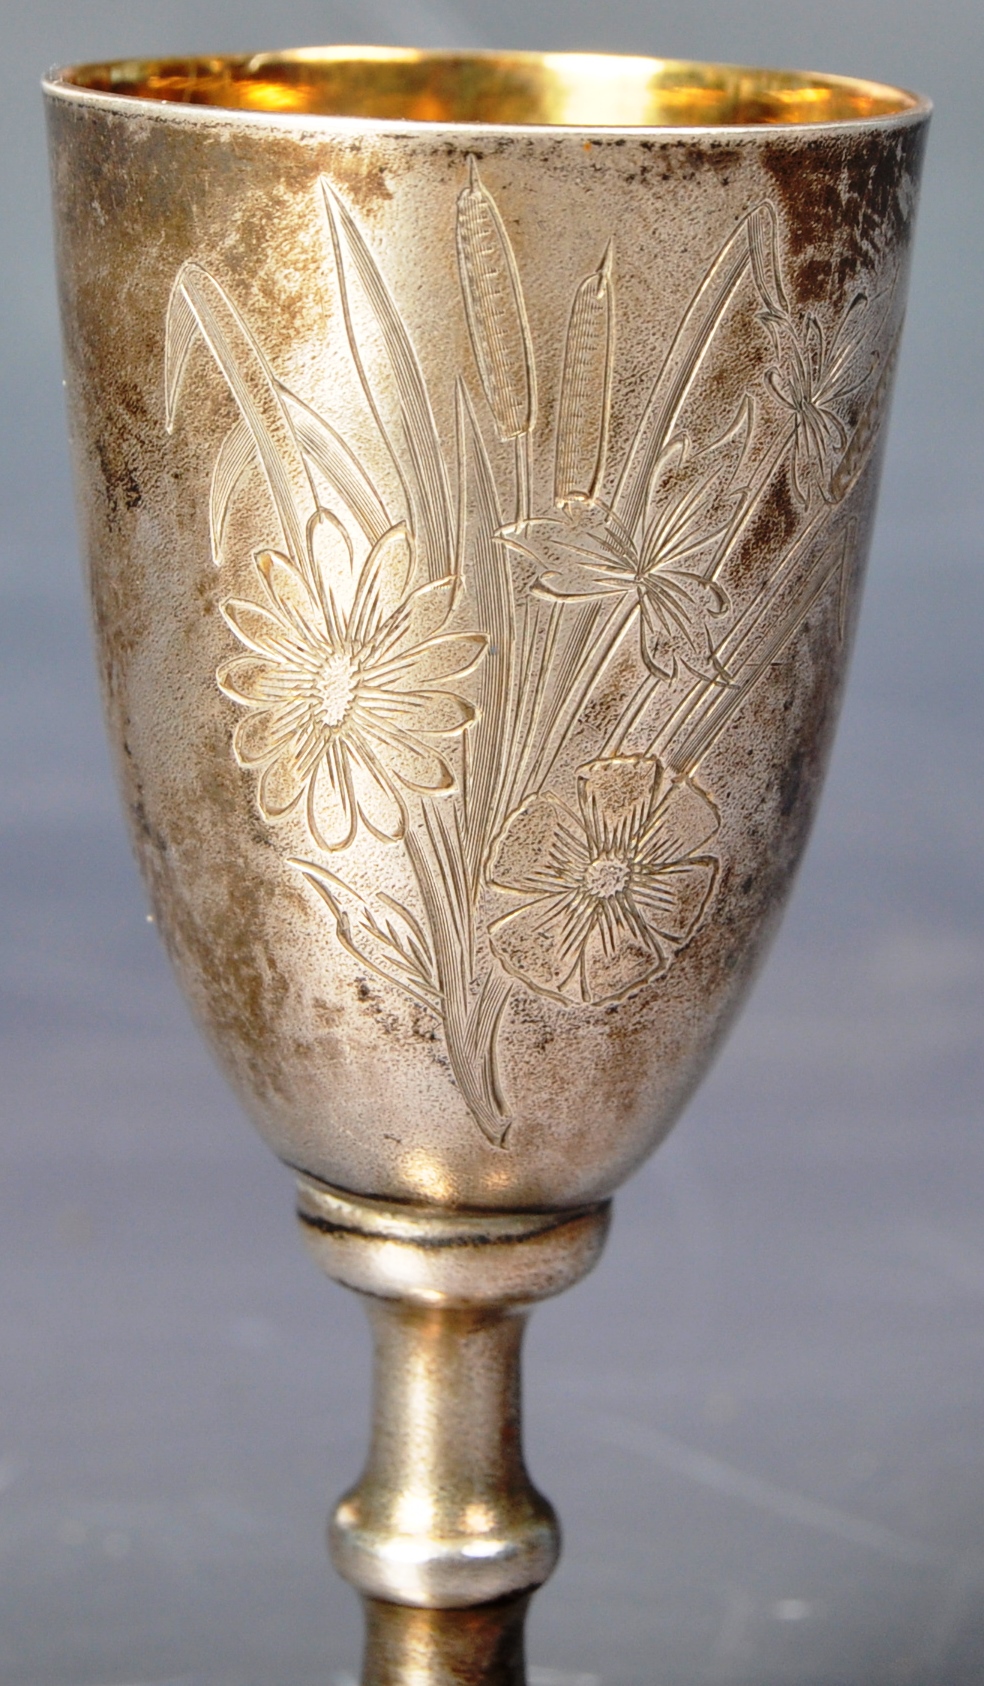 PAIR OF EARLY 20TH CENTURY RUSSIAN SILVER VODKA DRINKING CUPS - Image 3 of 6